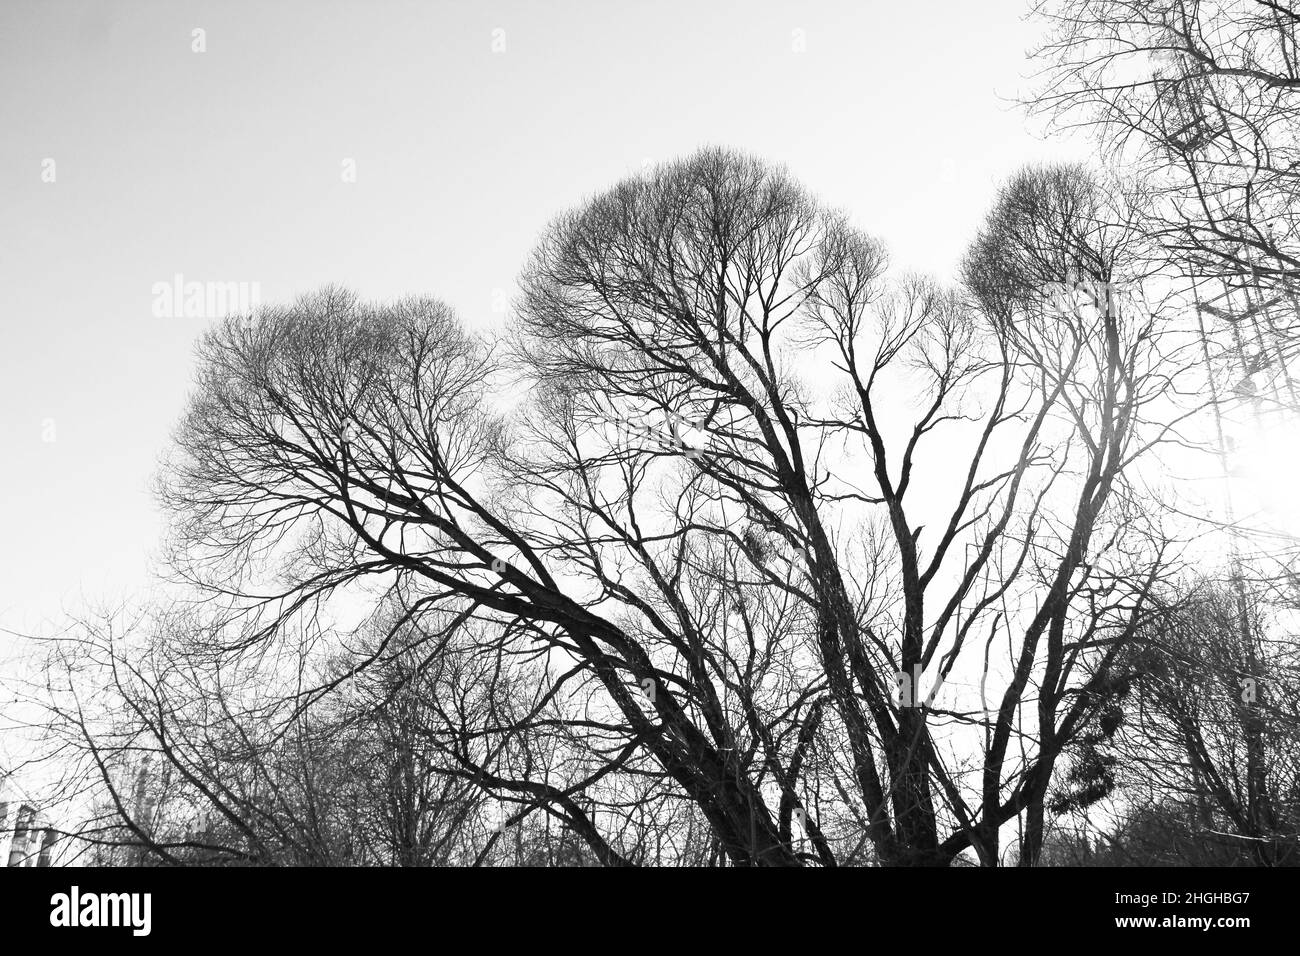 Black silhouette of a tree without leaves against a light sky, black and white monochrome stock photo with empty space for text.  Stock Photo